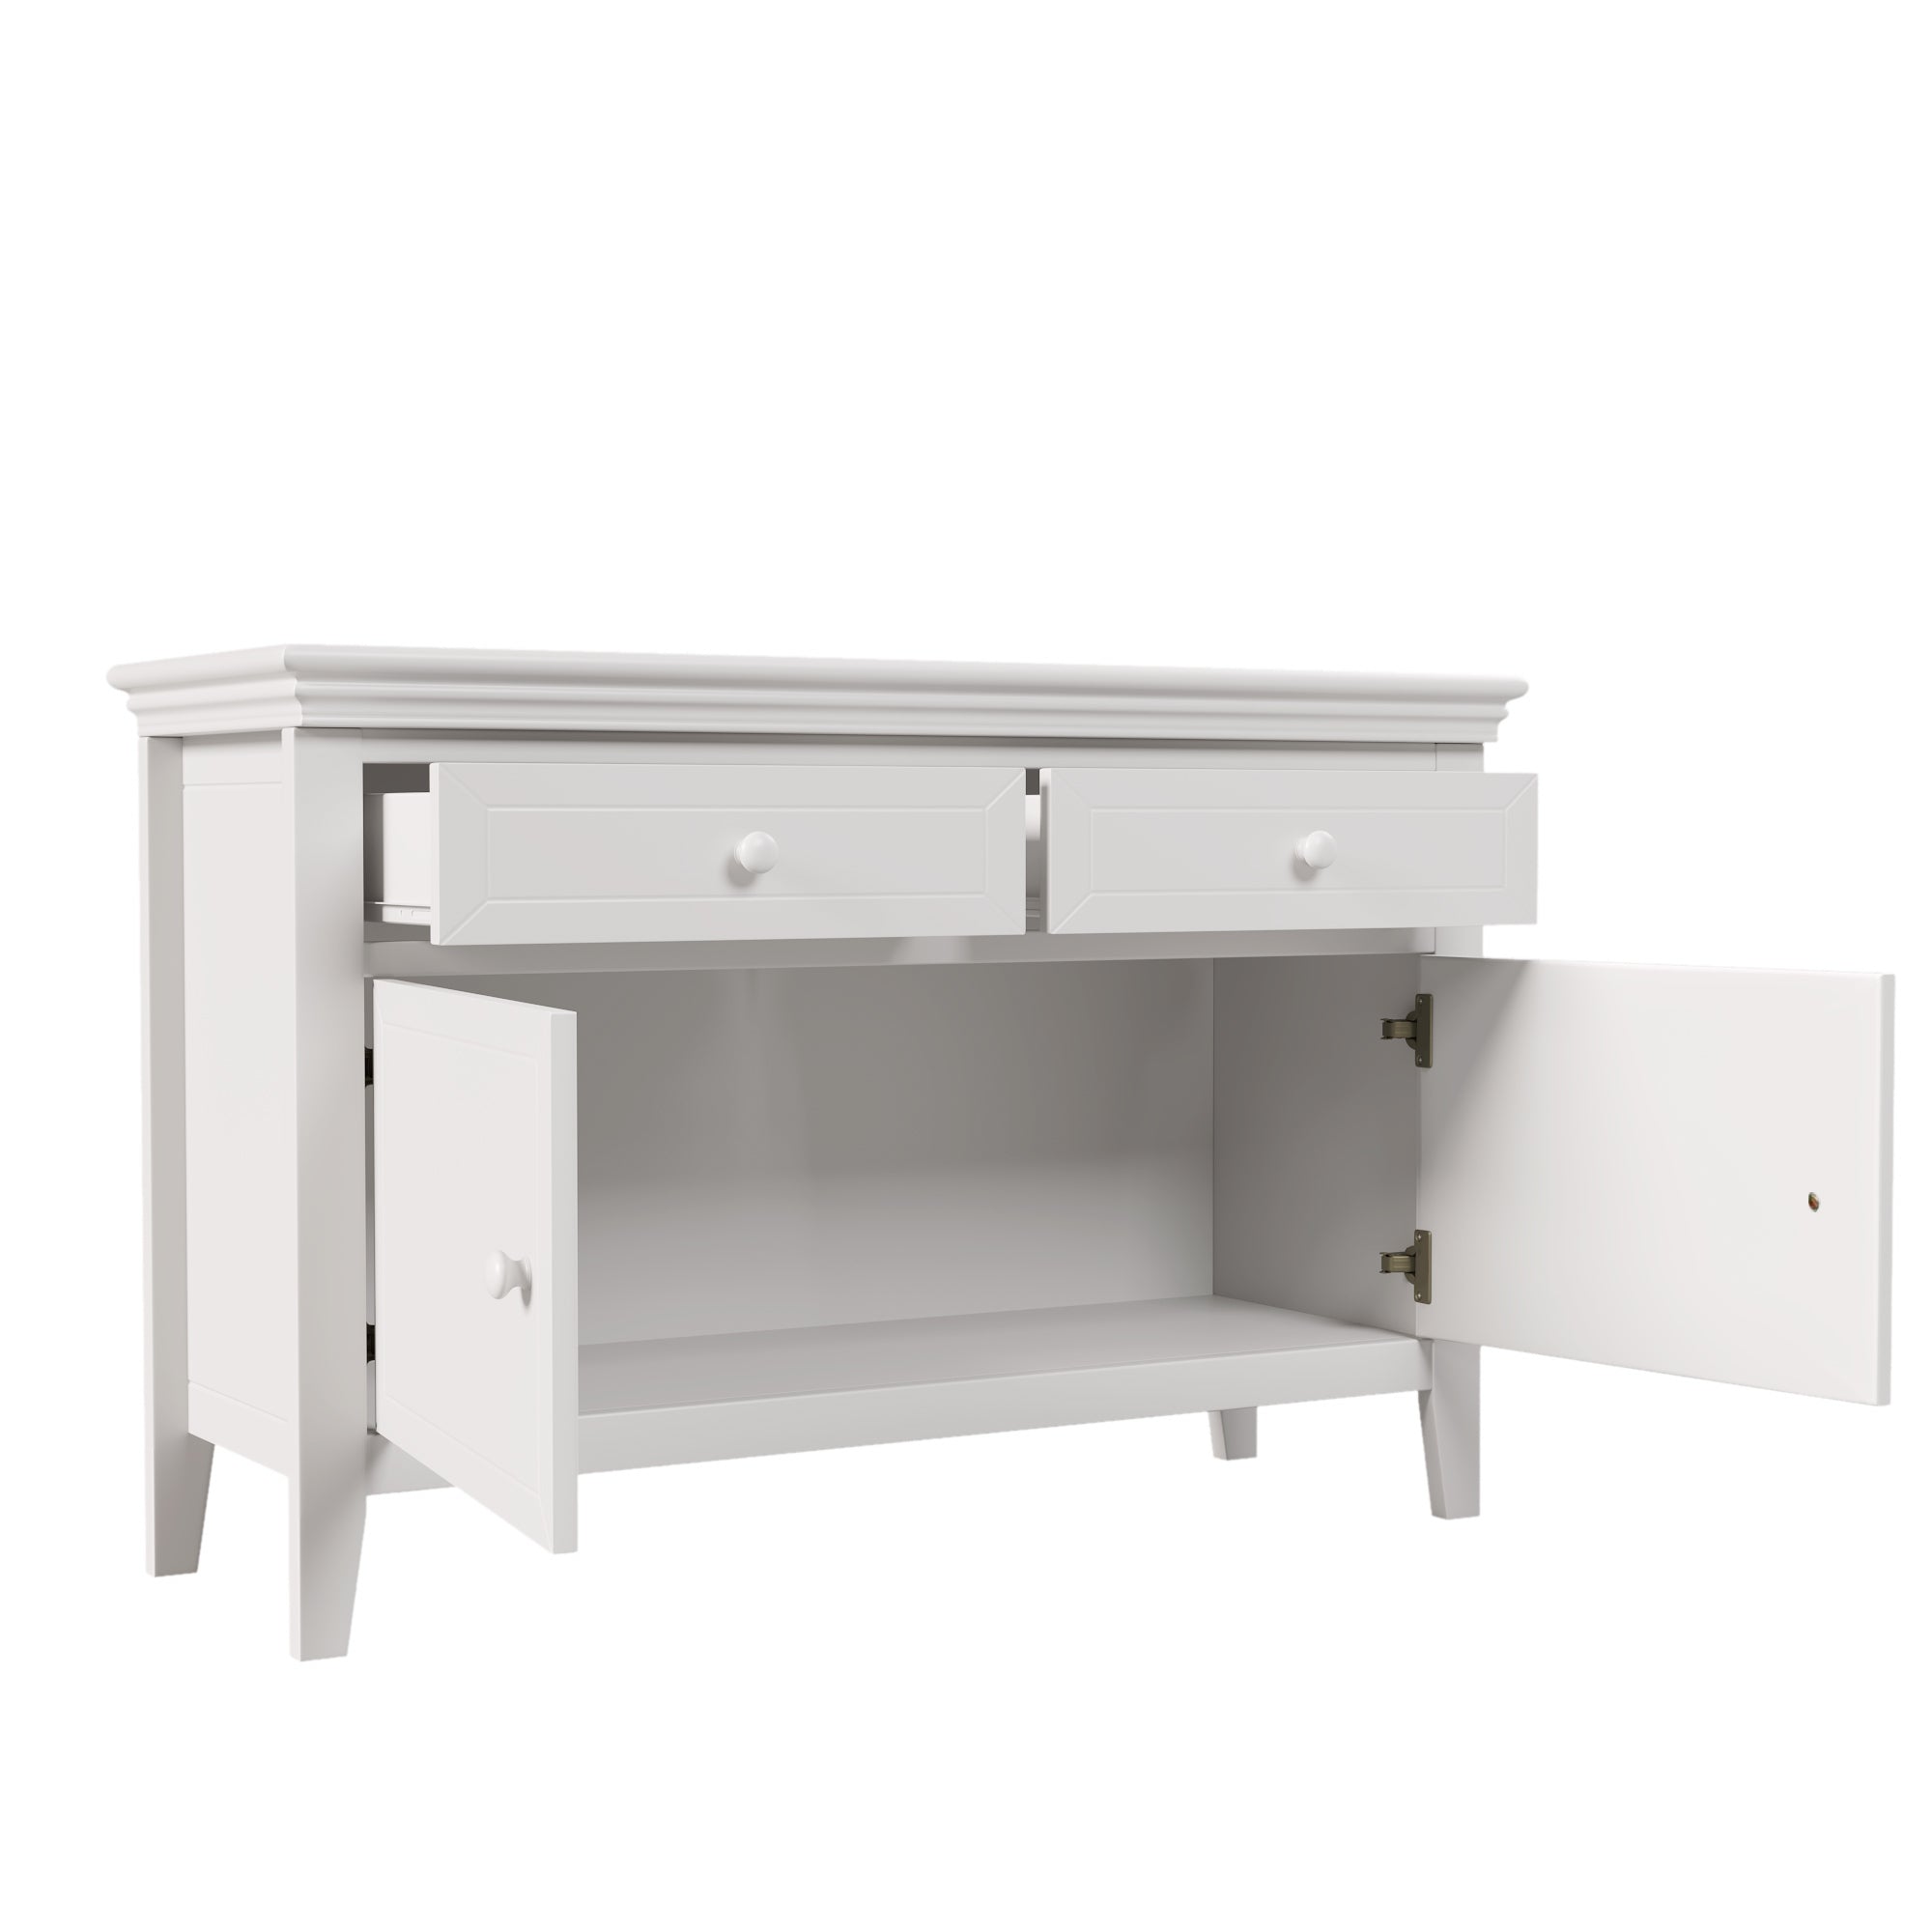 Traditional Concise Style White Solid Wood Dresser